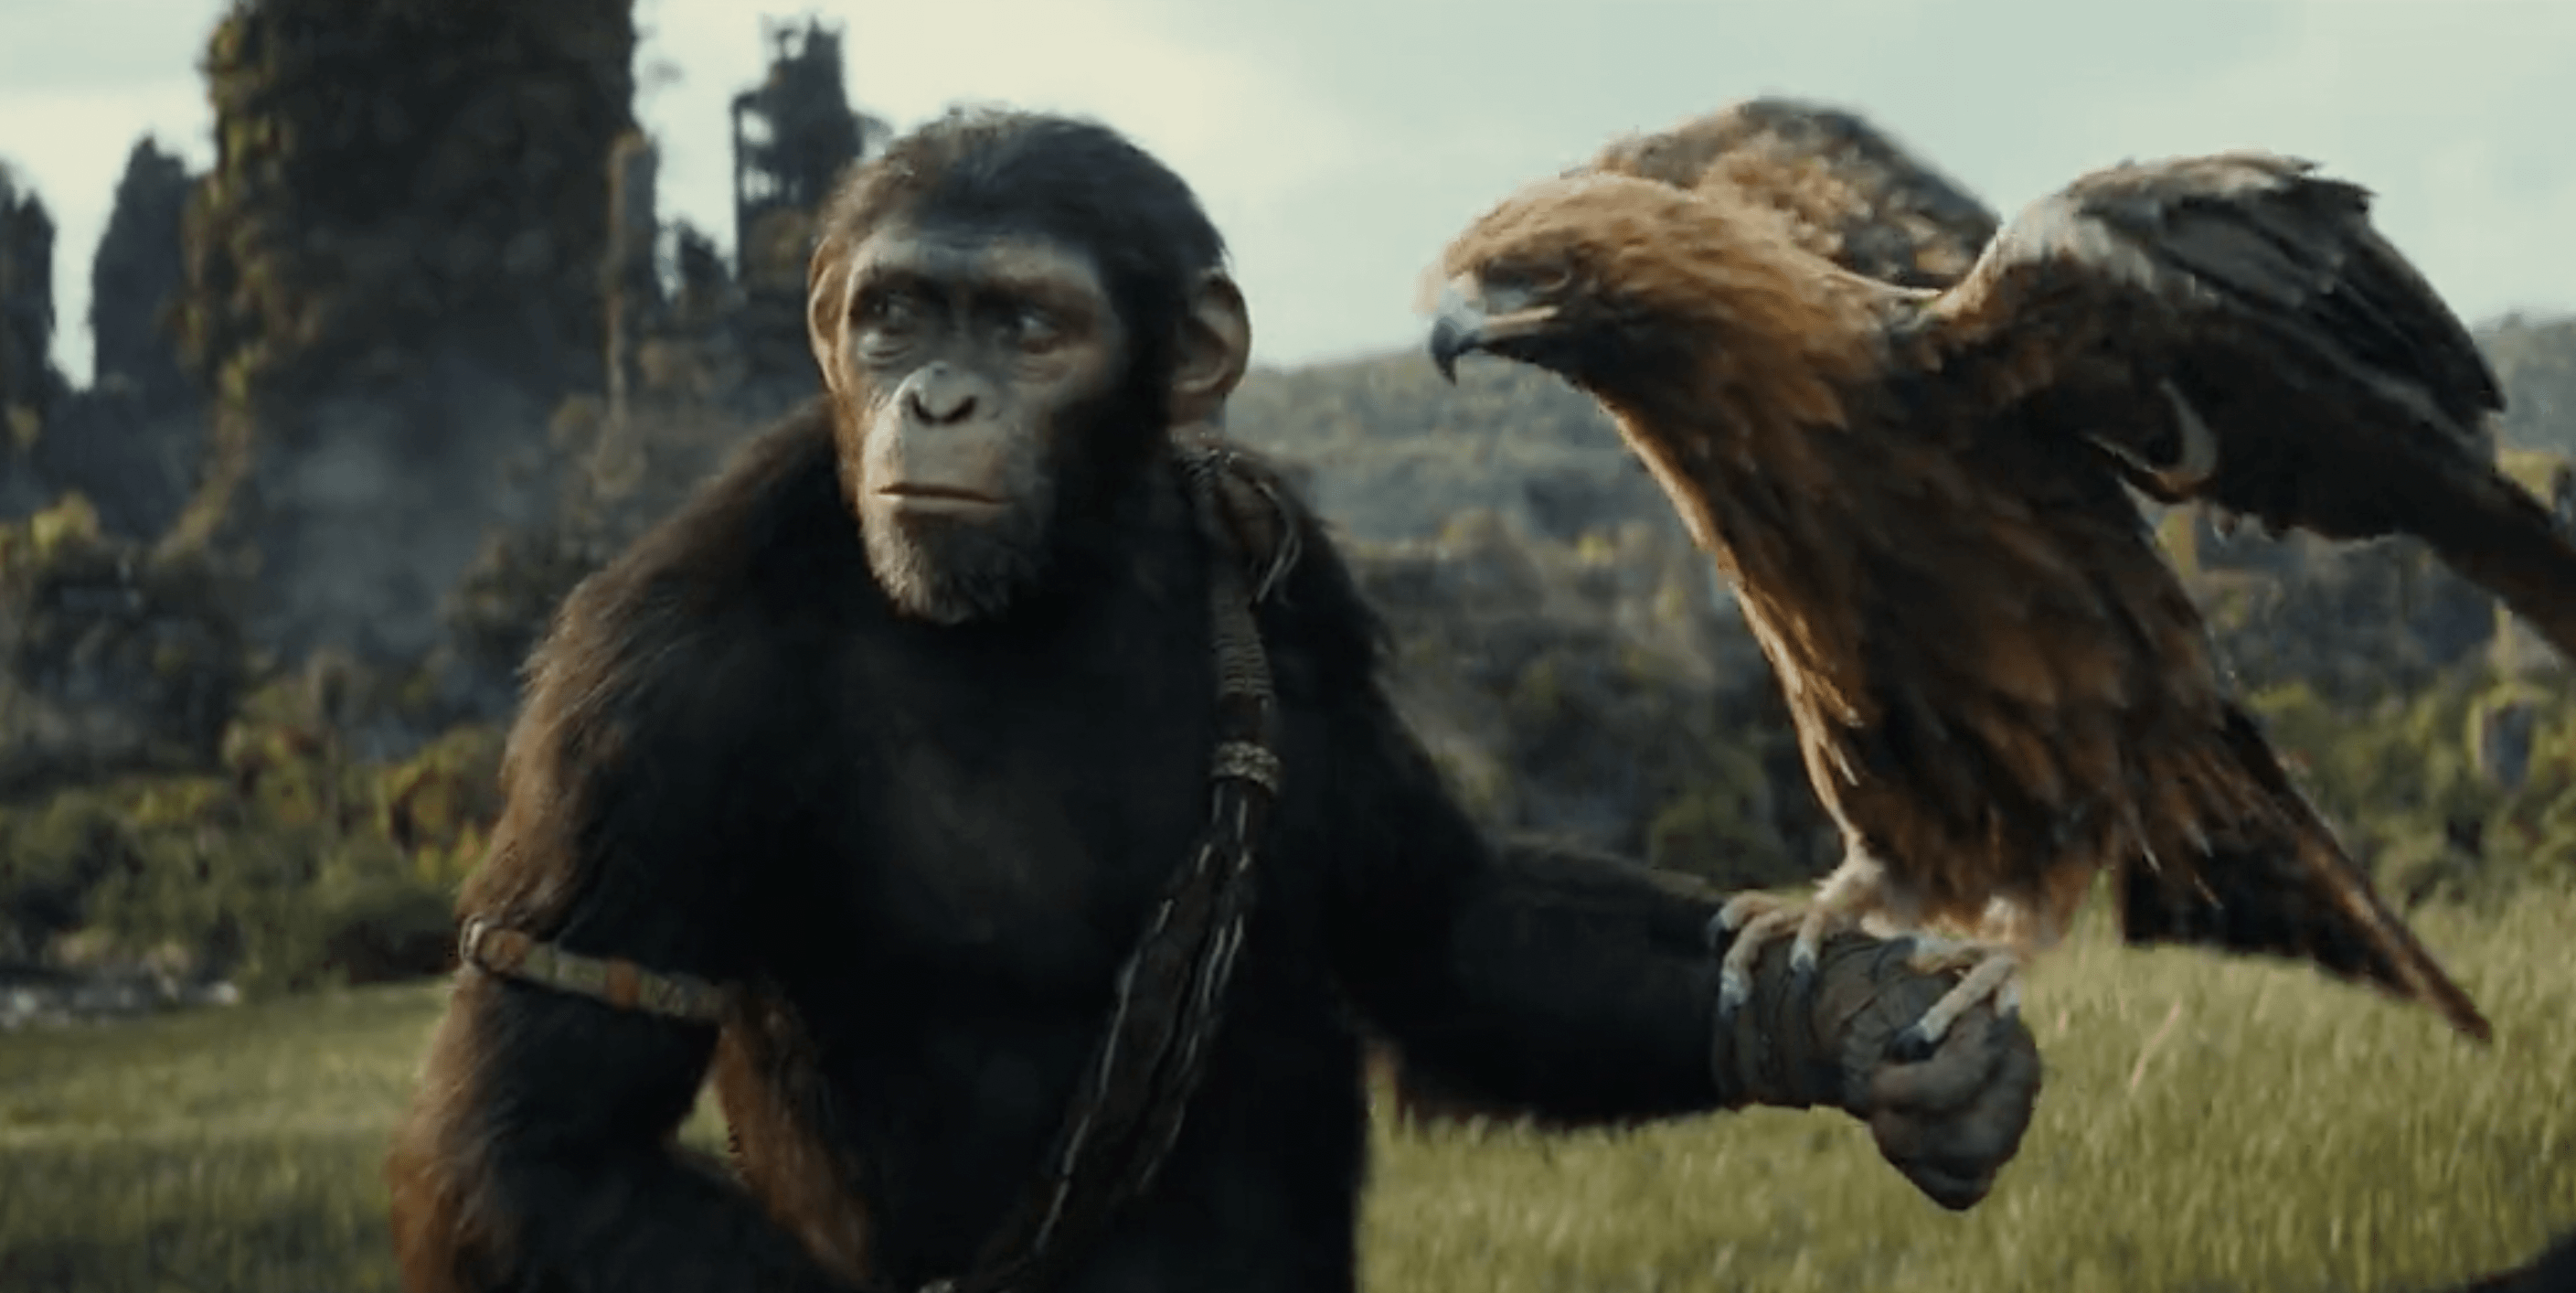 BACK FOR MORE: The supposedly finished Planet of the Apes franchise continues